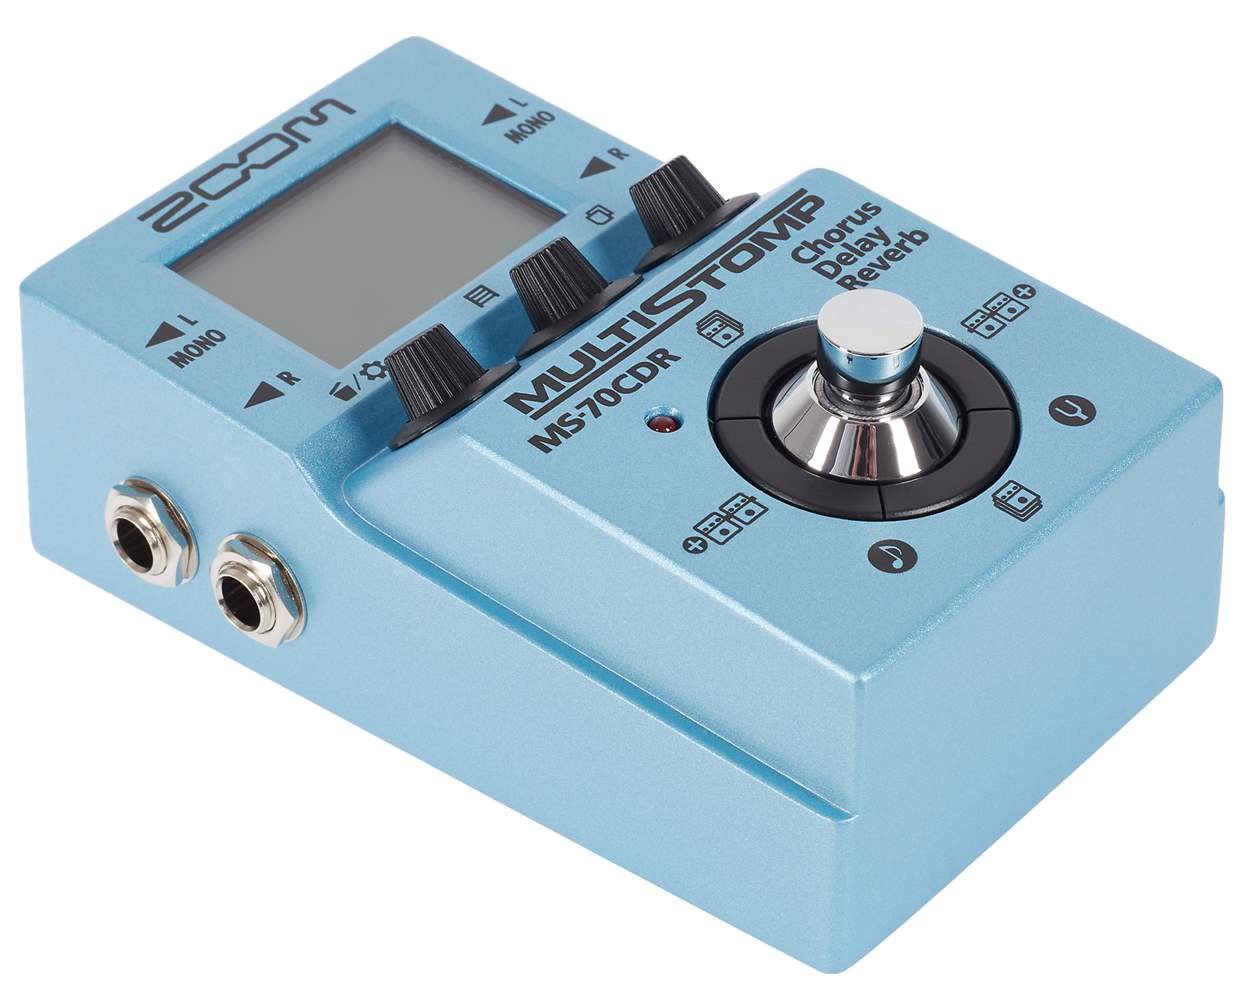 ZOOM MS-70CDR Guitar Multi-Effect | Kytary.ie